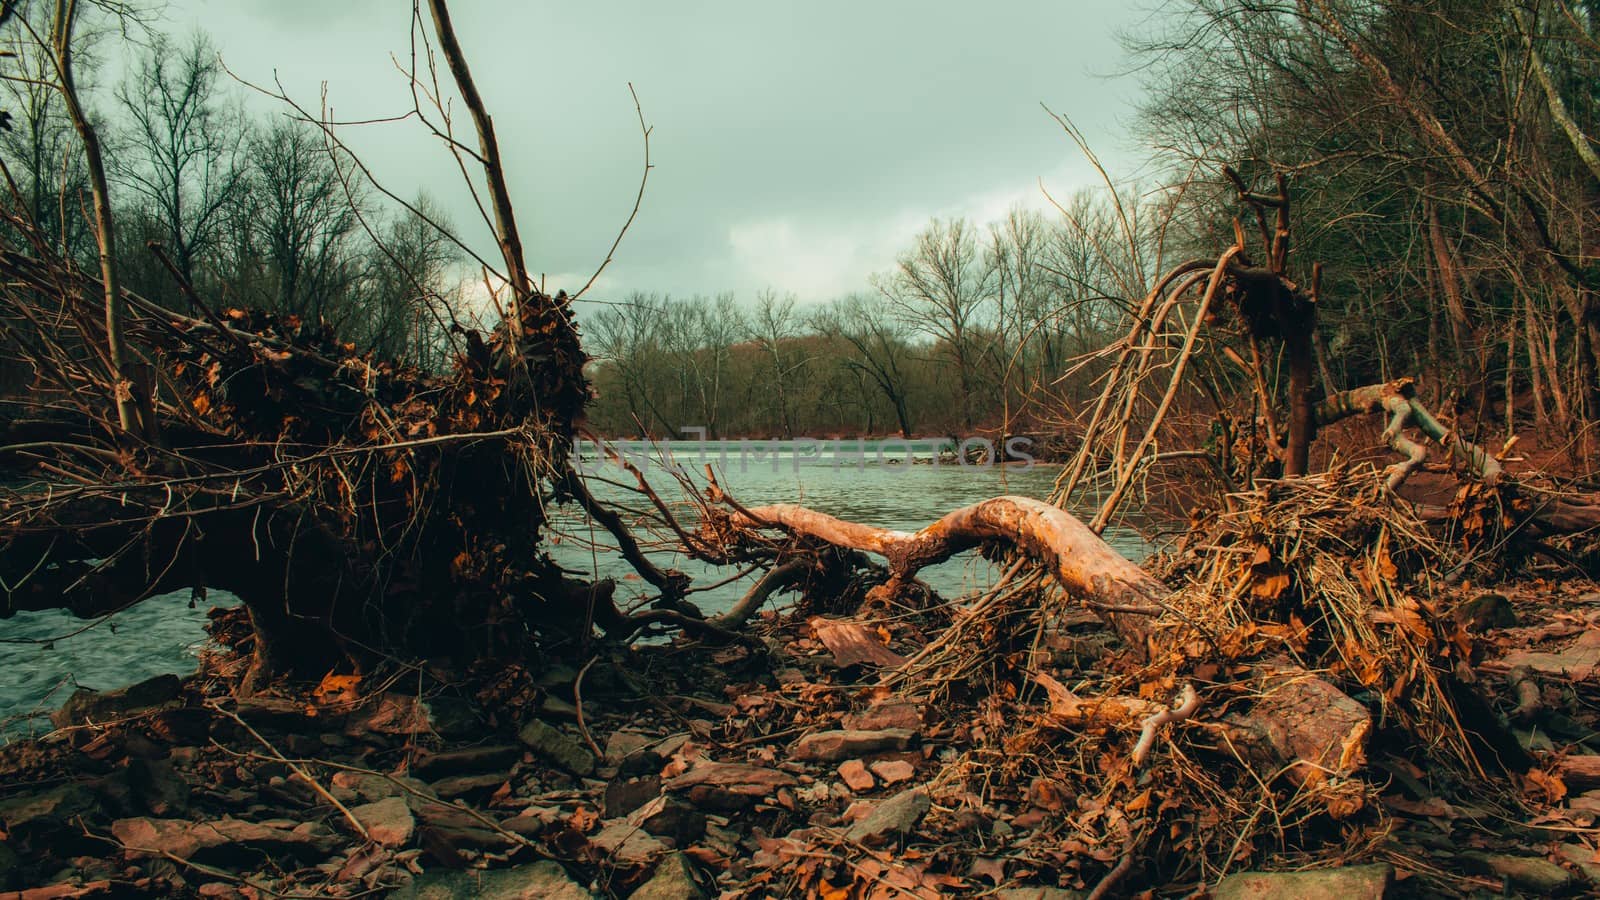 A Fallen Tree Next to a River With a Dam in the Background by bju12290